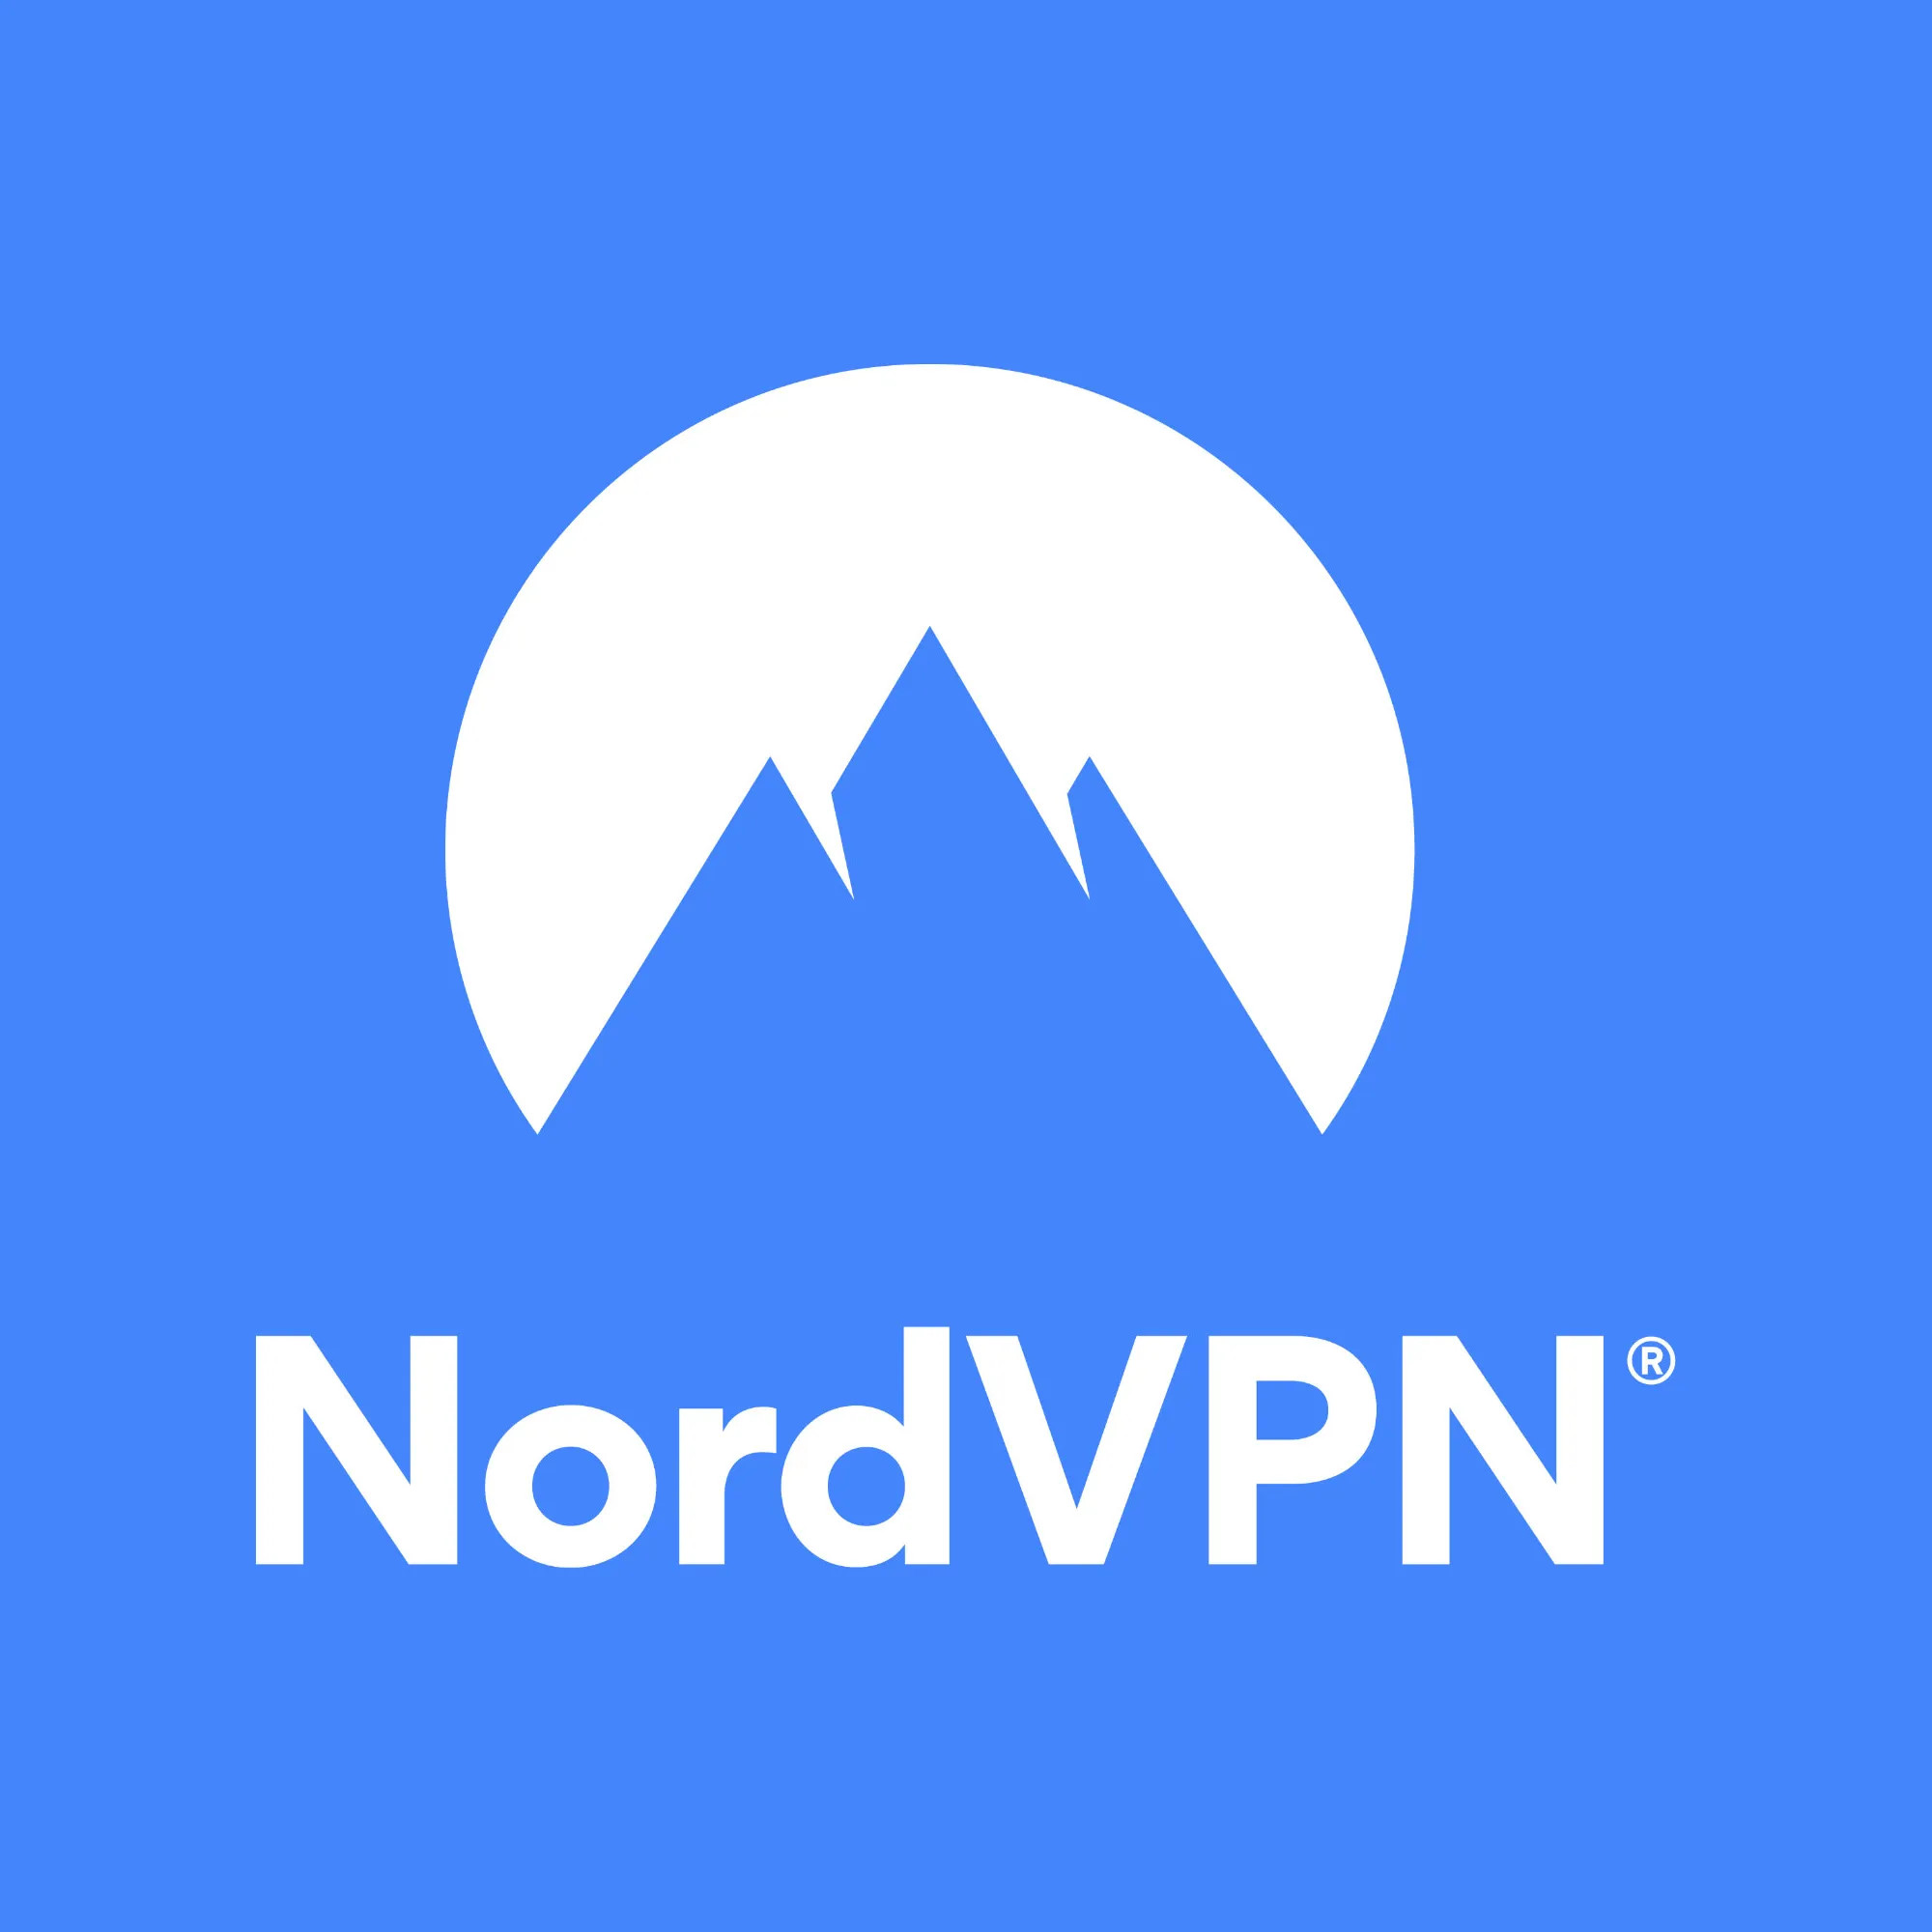 Best VPN for Crypto Trading: What to Look For?